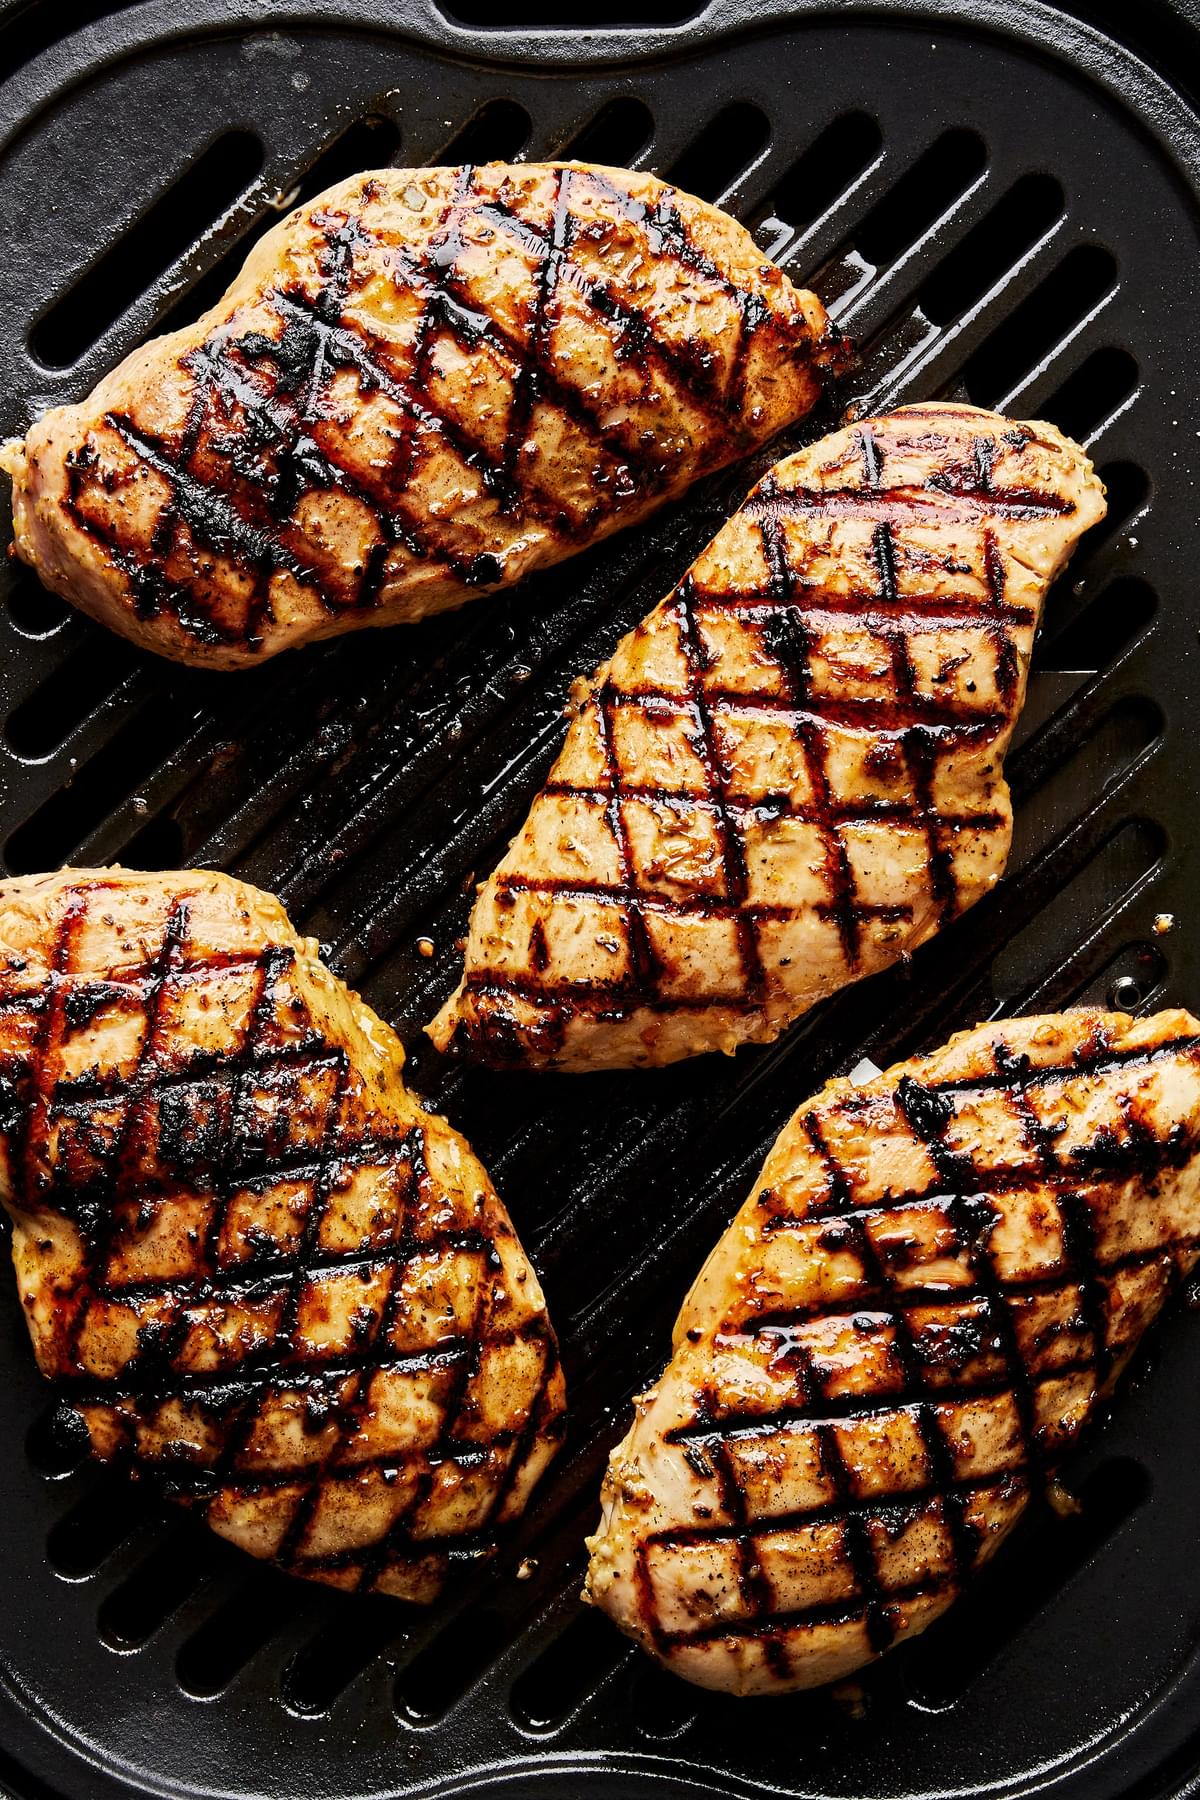 4 chicken breasts cooking on a grill